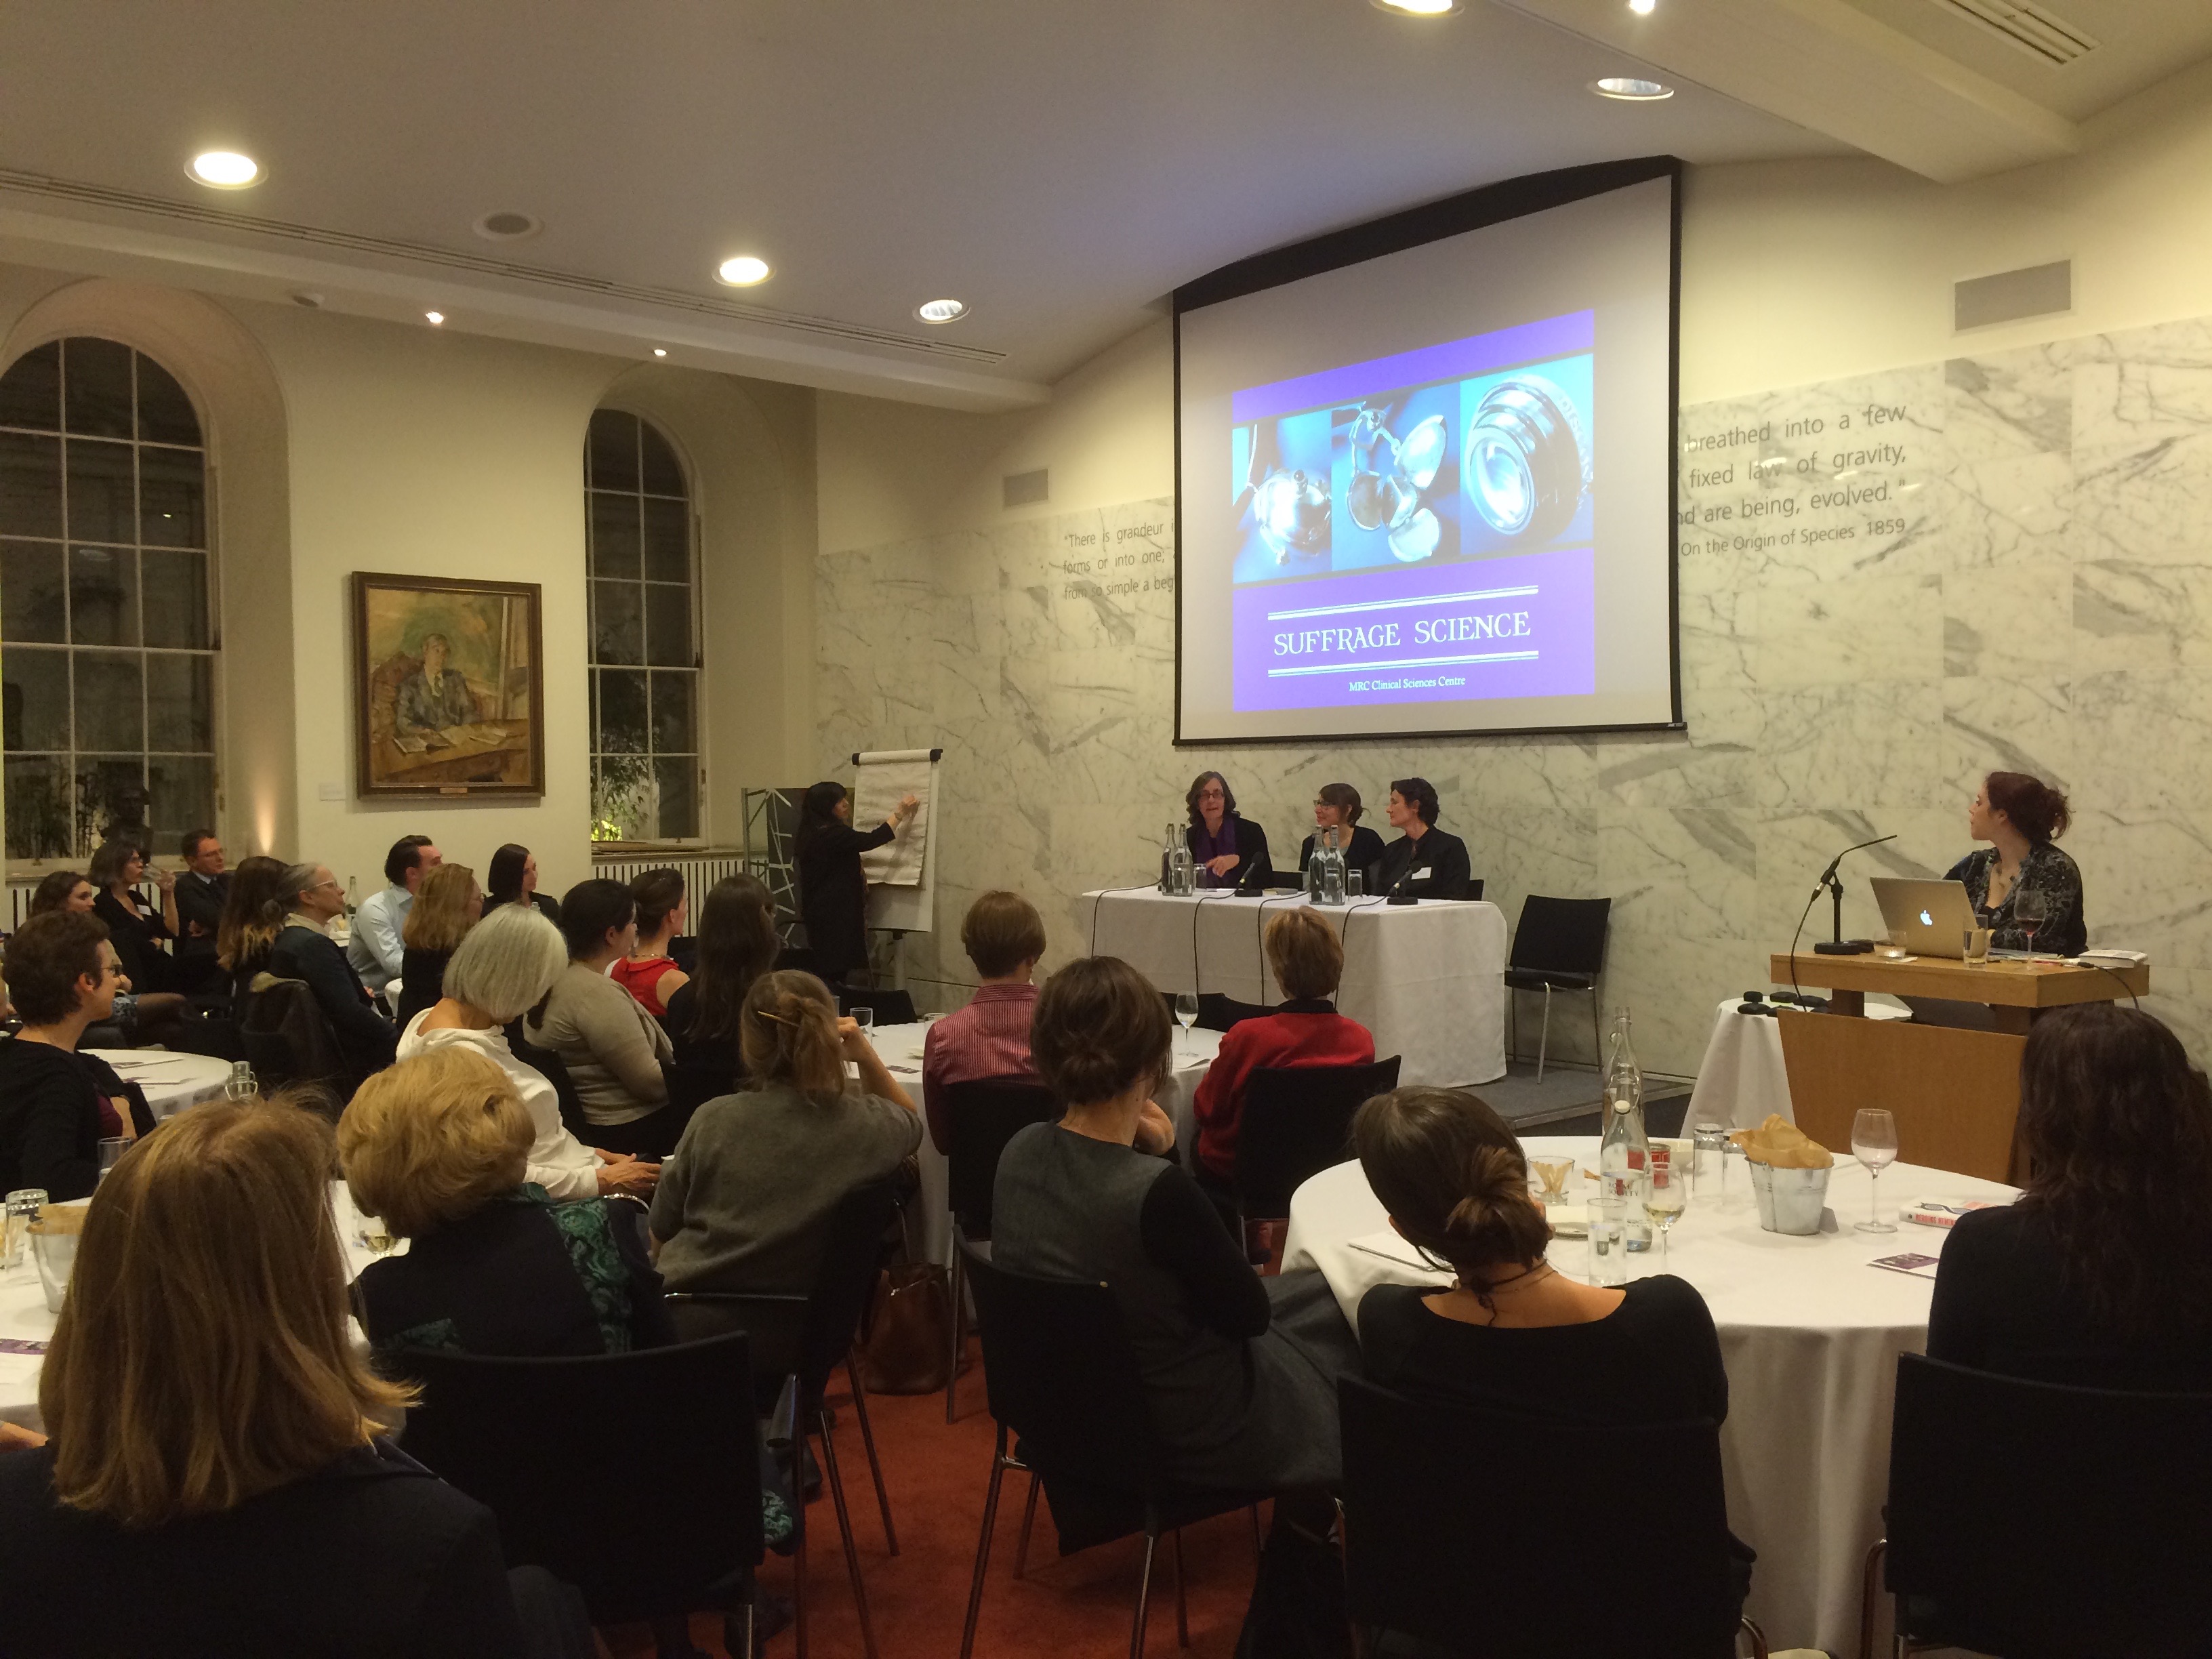 Suffrage Science awards ceremony at the Royal Society